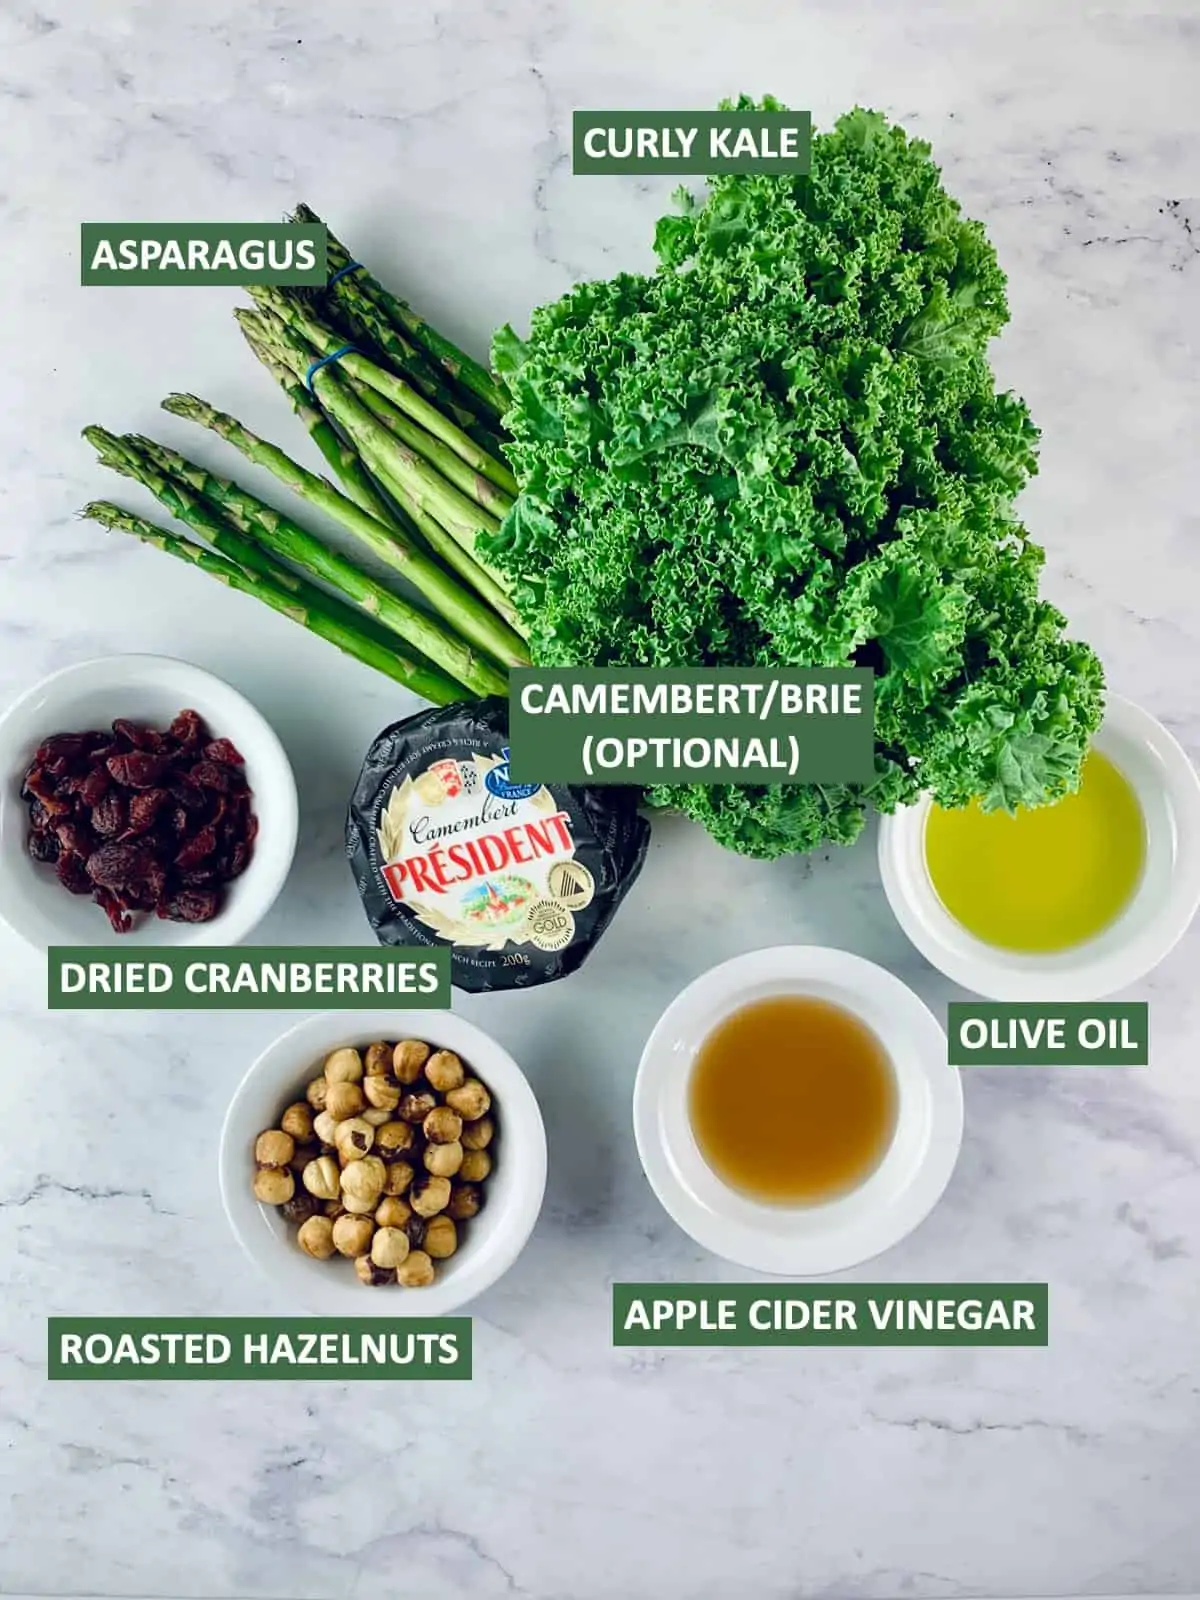 Labelled ingredients needed to make Kale and Cranberry salad.